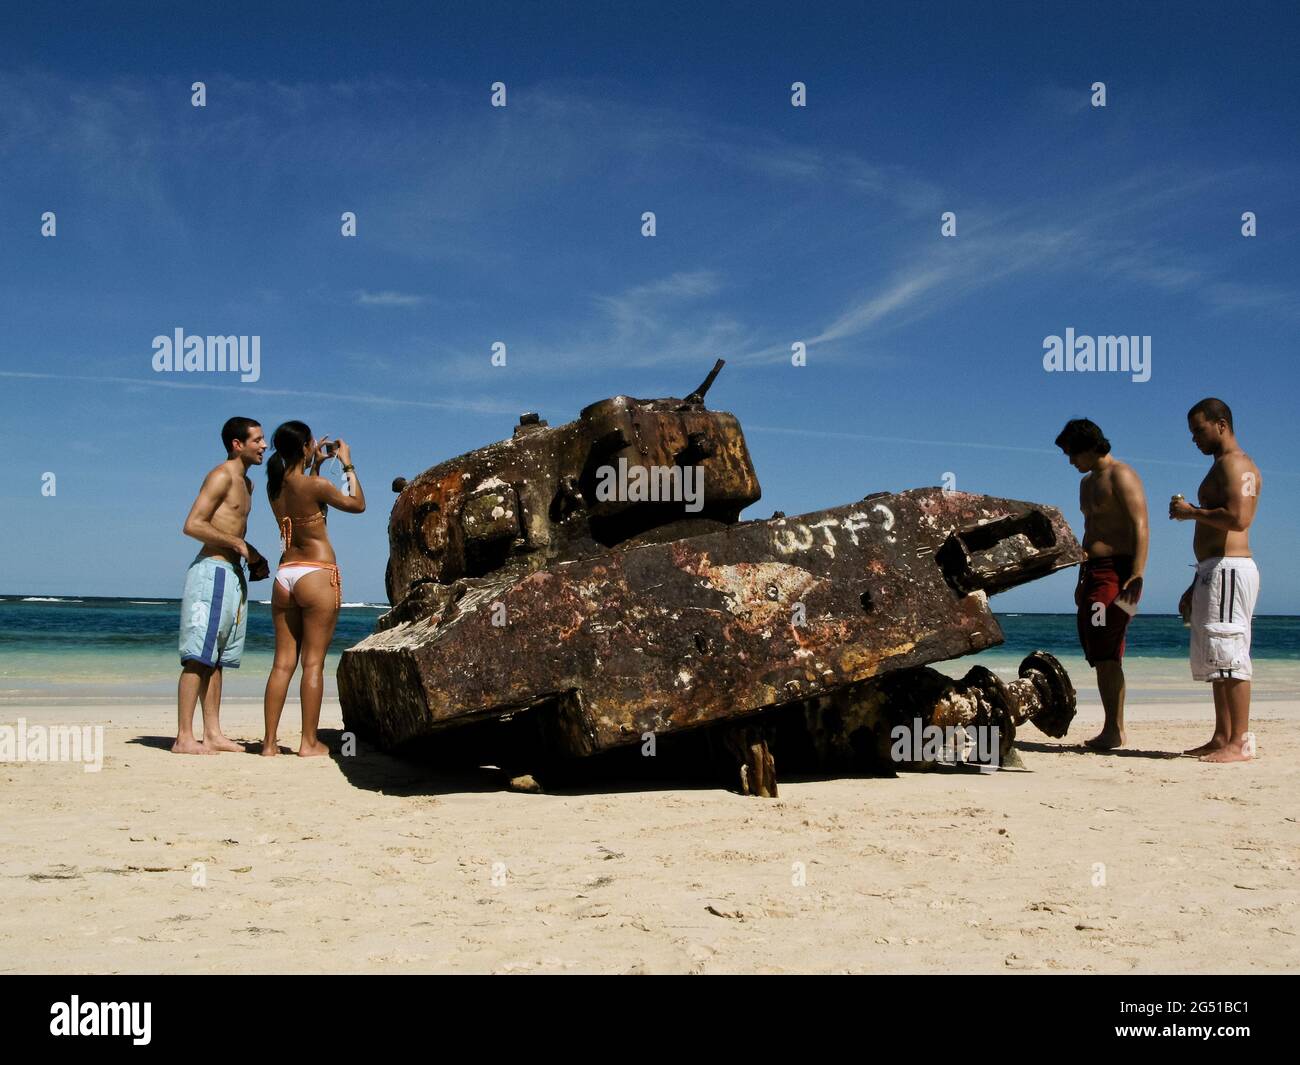 An abandoned tank, used as a target in the past by US navy, at Flamenco beach, in Culebra island, Puerto Rico Stock Photo